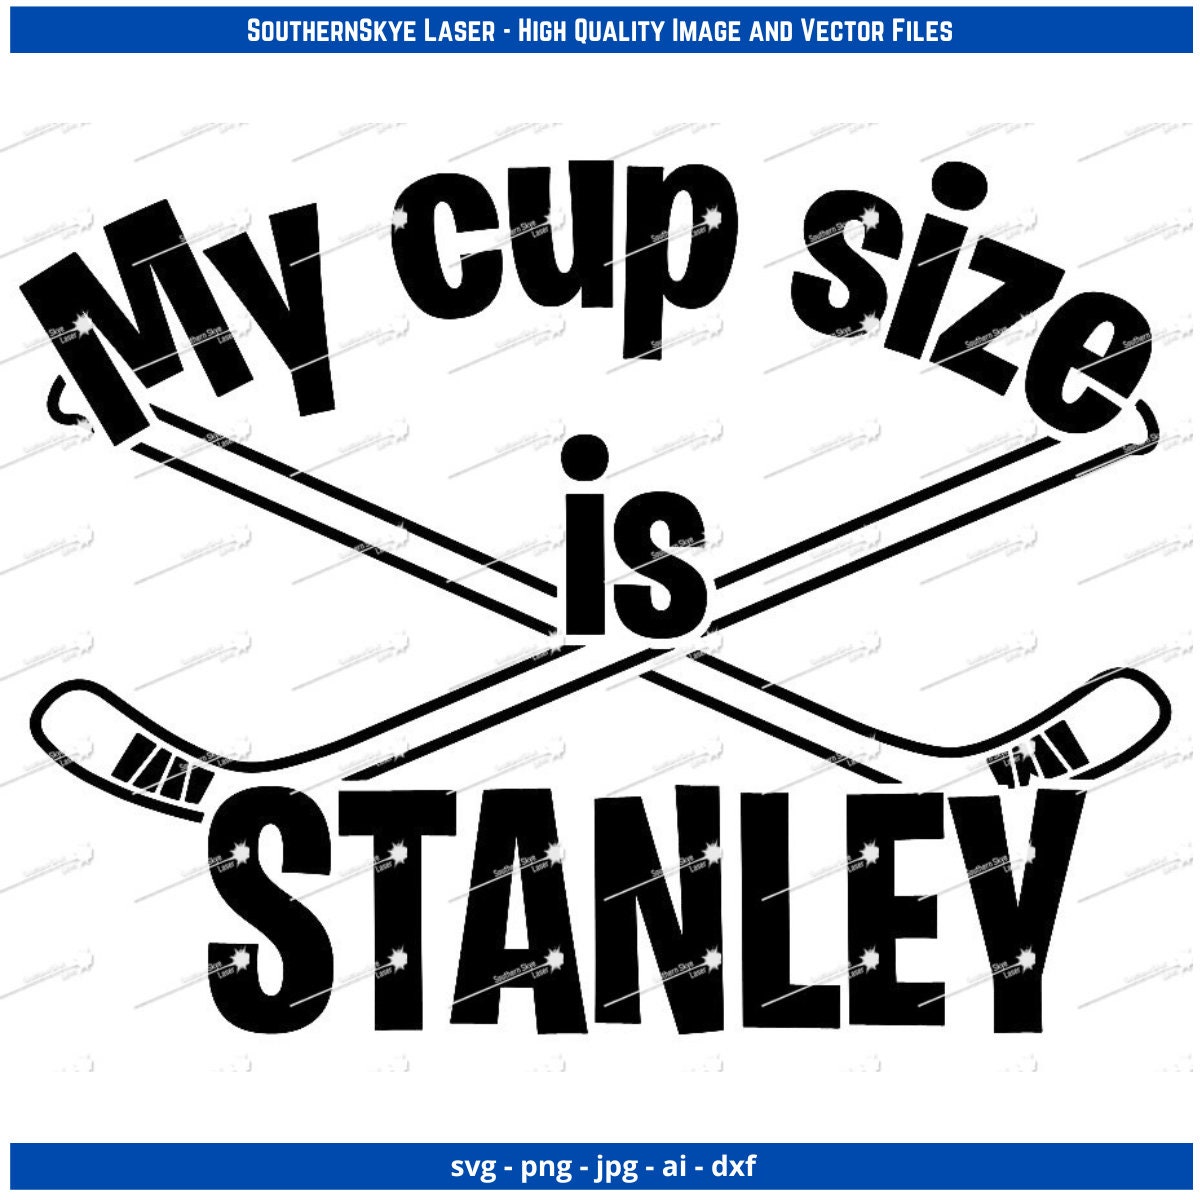 Stanley Cup Champions Logo PNG Vector (AI, PDF) Free Download